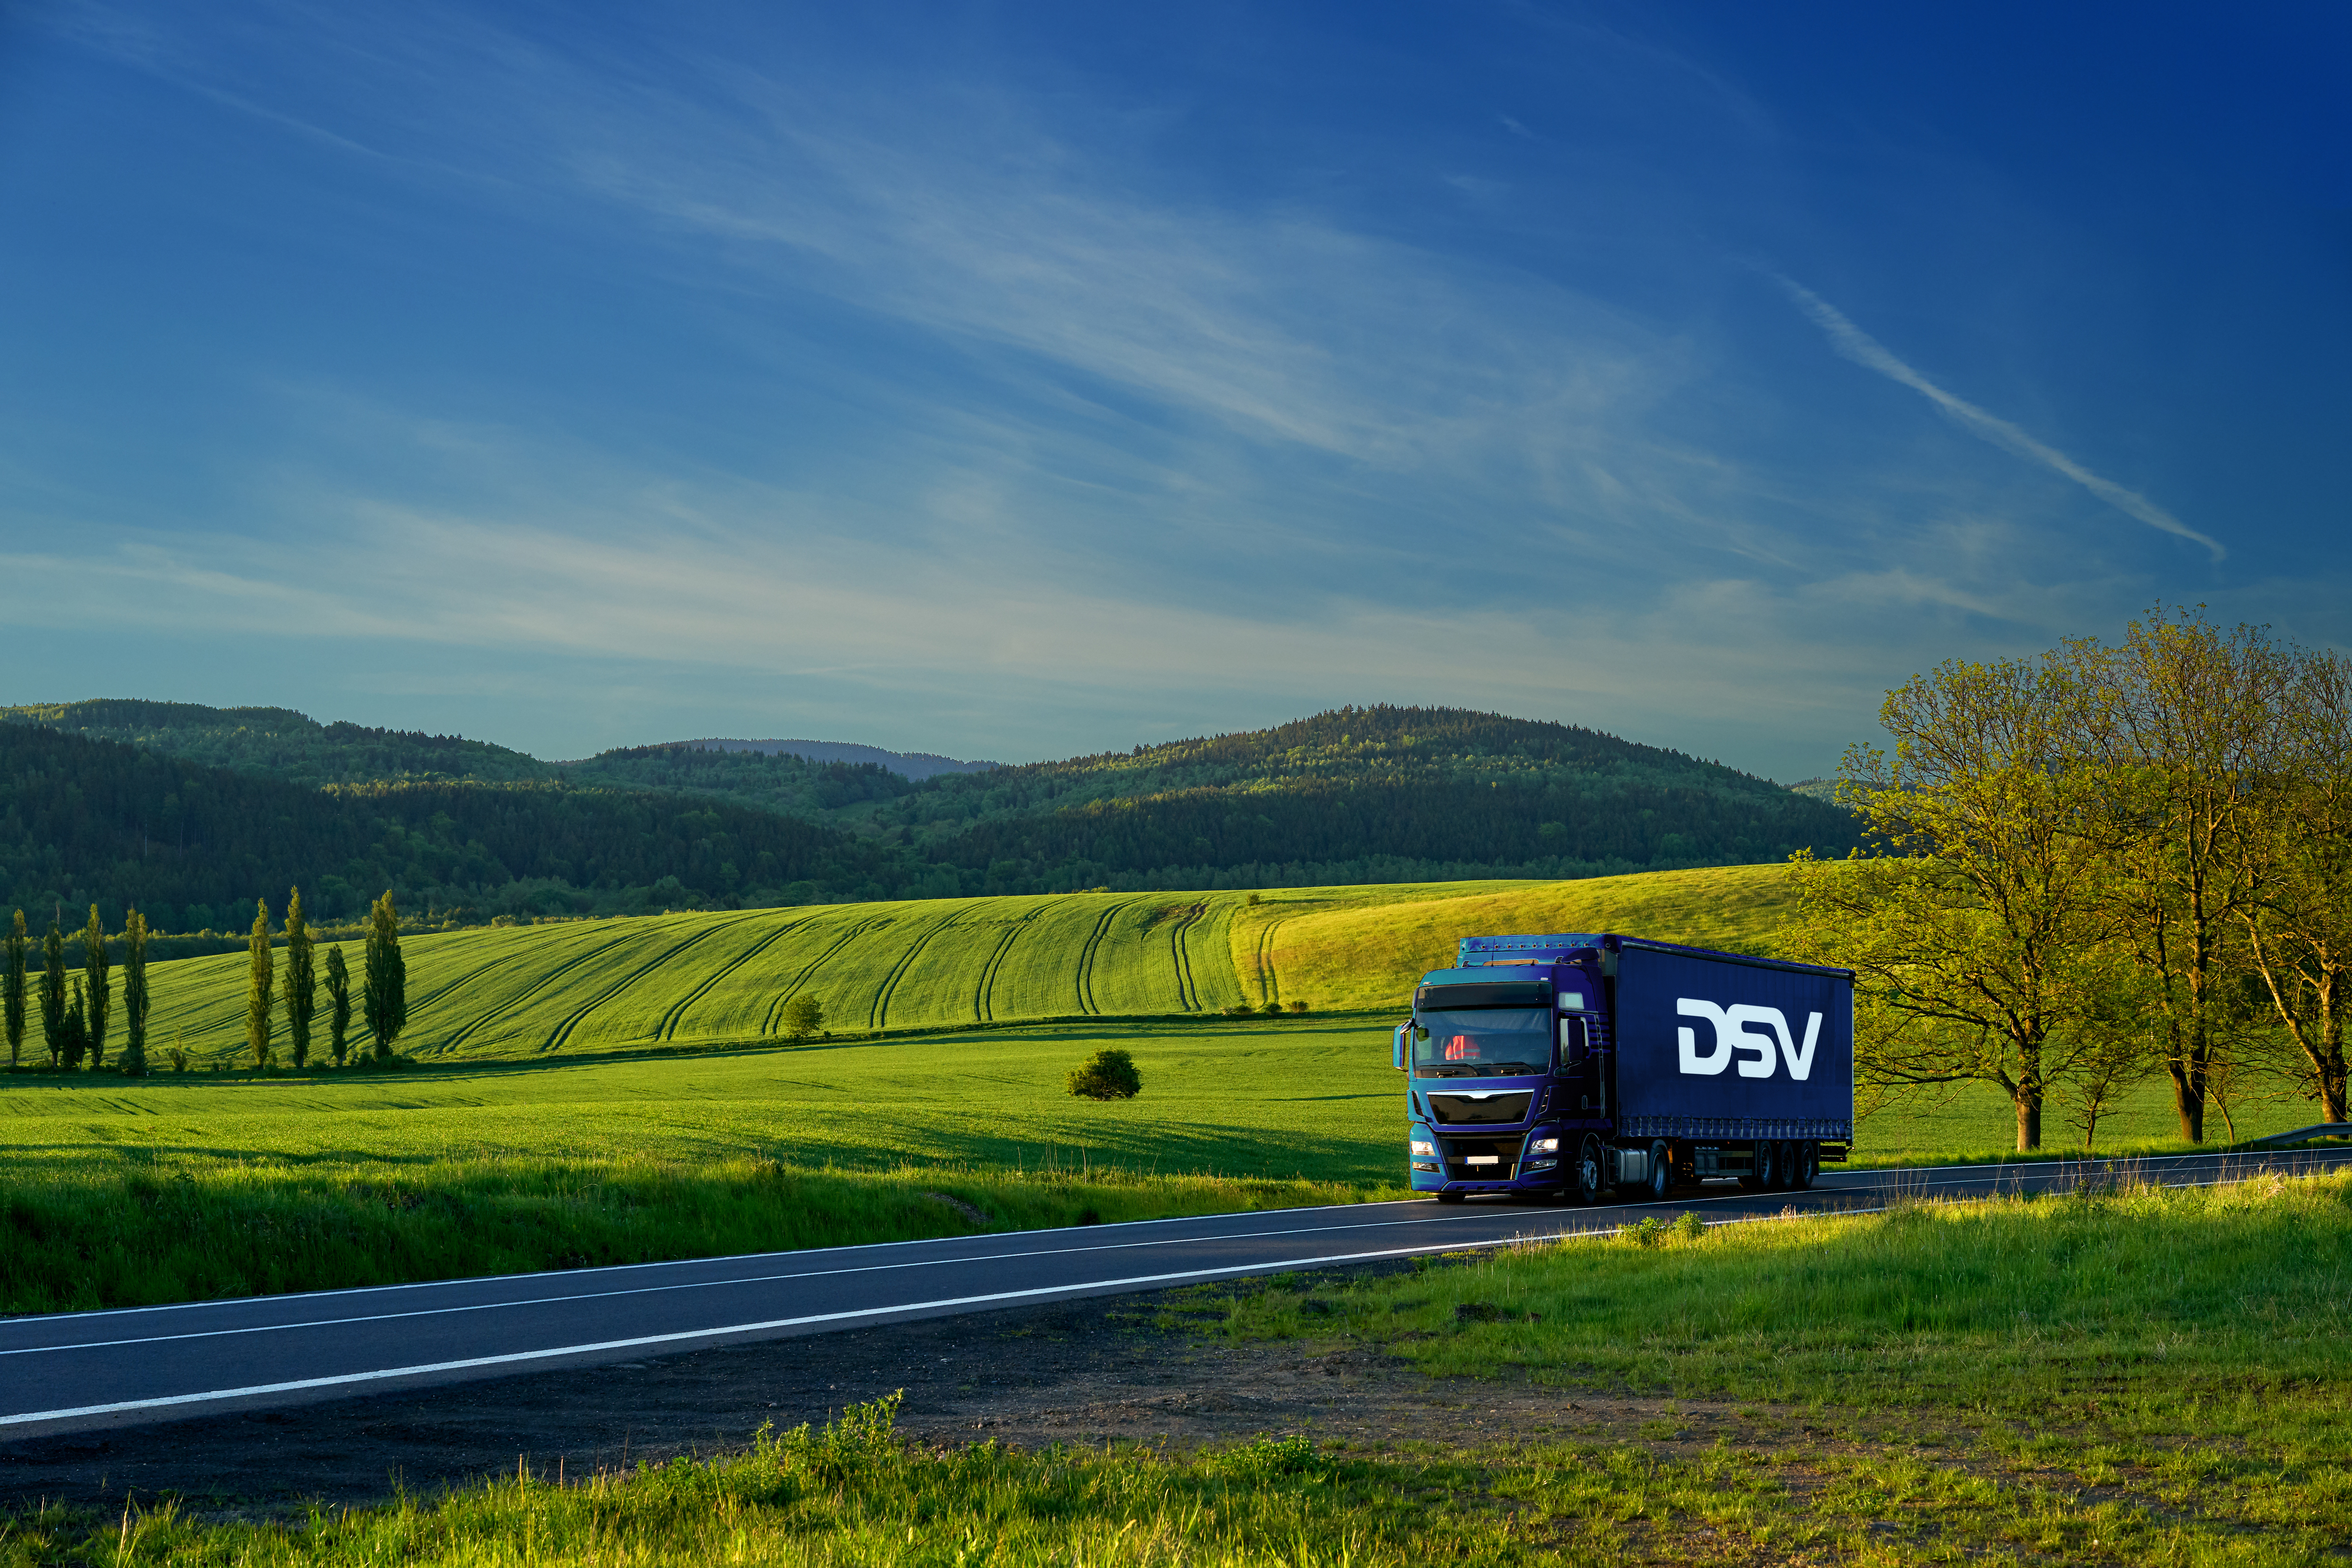 DSV Road: The demand for groupage transport and auxiliary services increases by over 30% this year, to almost 55 million euros